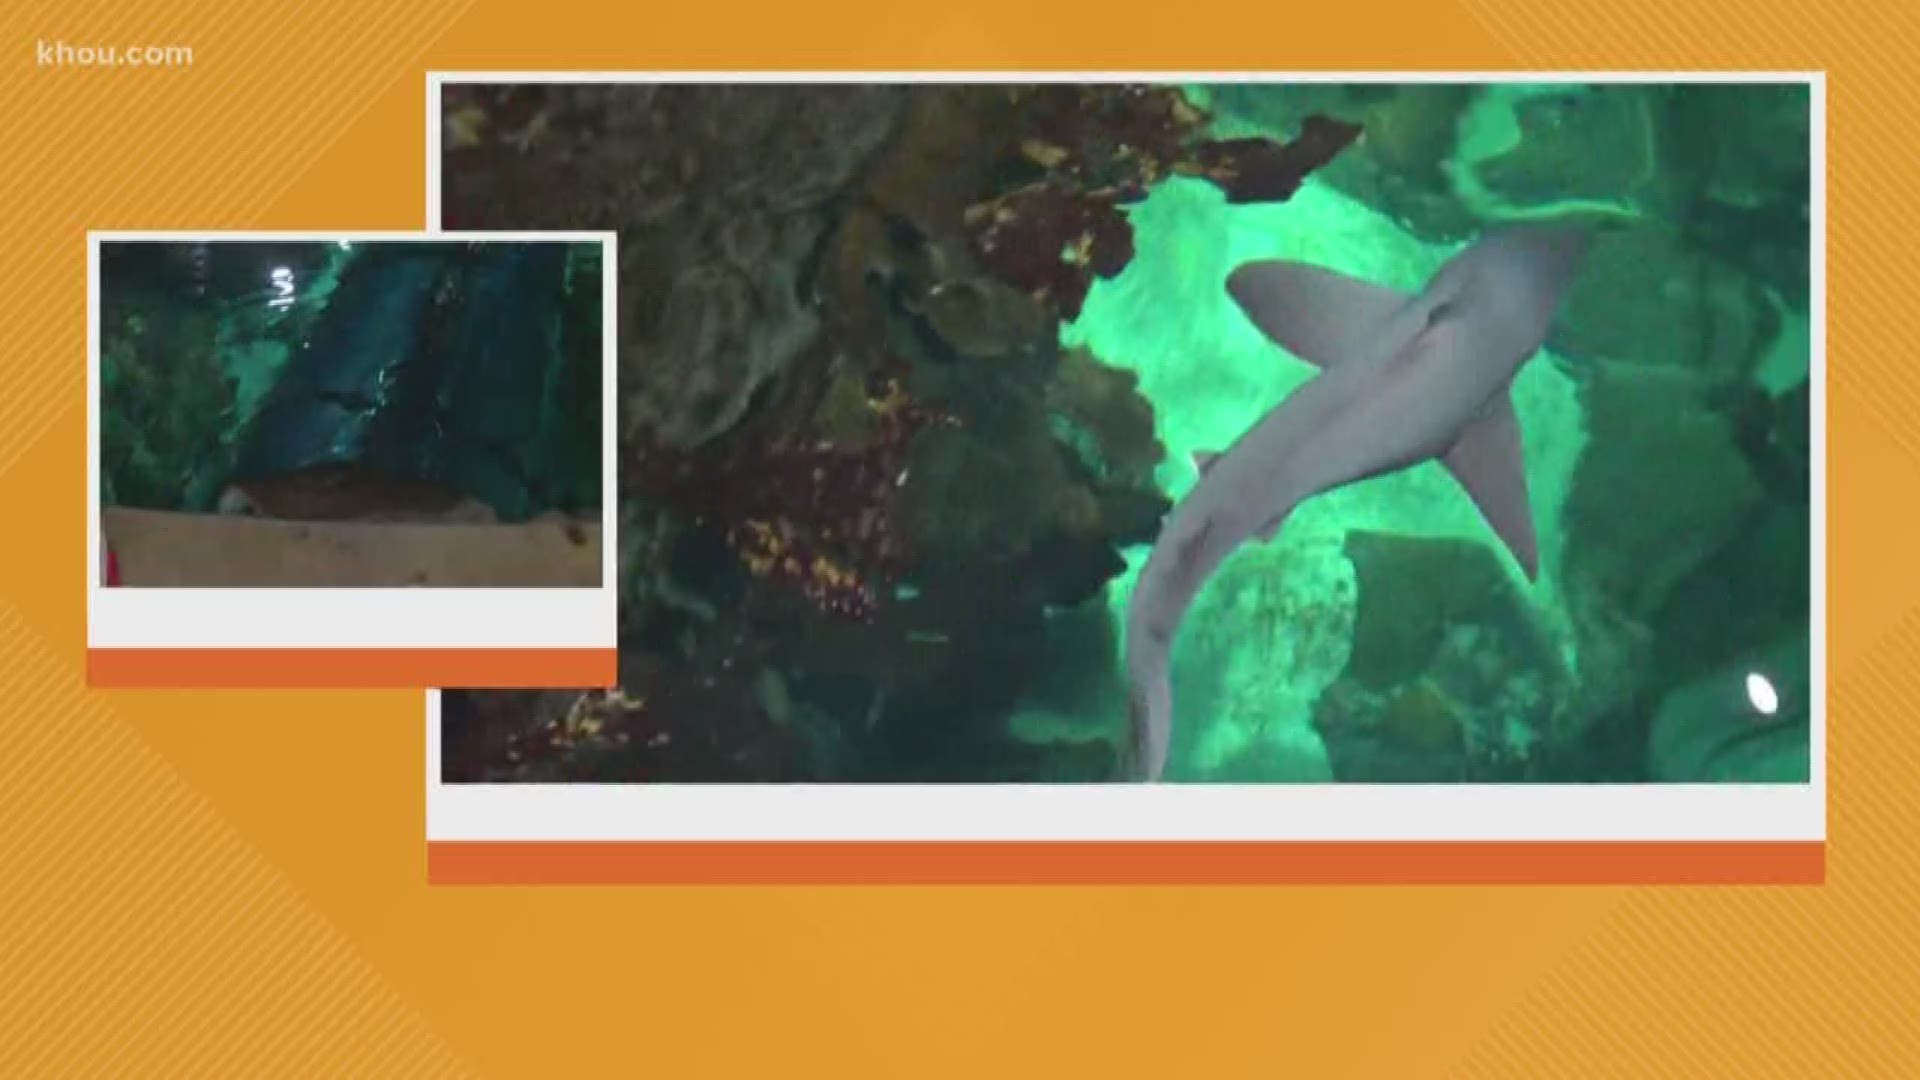 This morning we're celebrating shark week. The Discovery Channel dedicates shark-themed programming for those who love underwater creatures. But this morning we're taking you inside Moody Gardens in Galveston as they celebrate shark week. Our Ruben Galvan is there with a look behind-the-scenes.